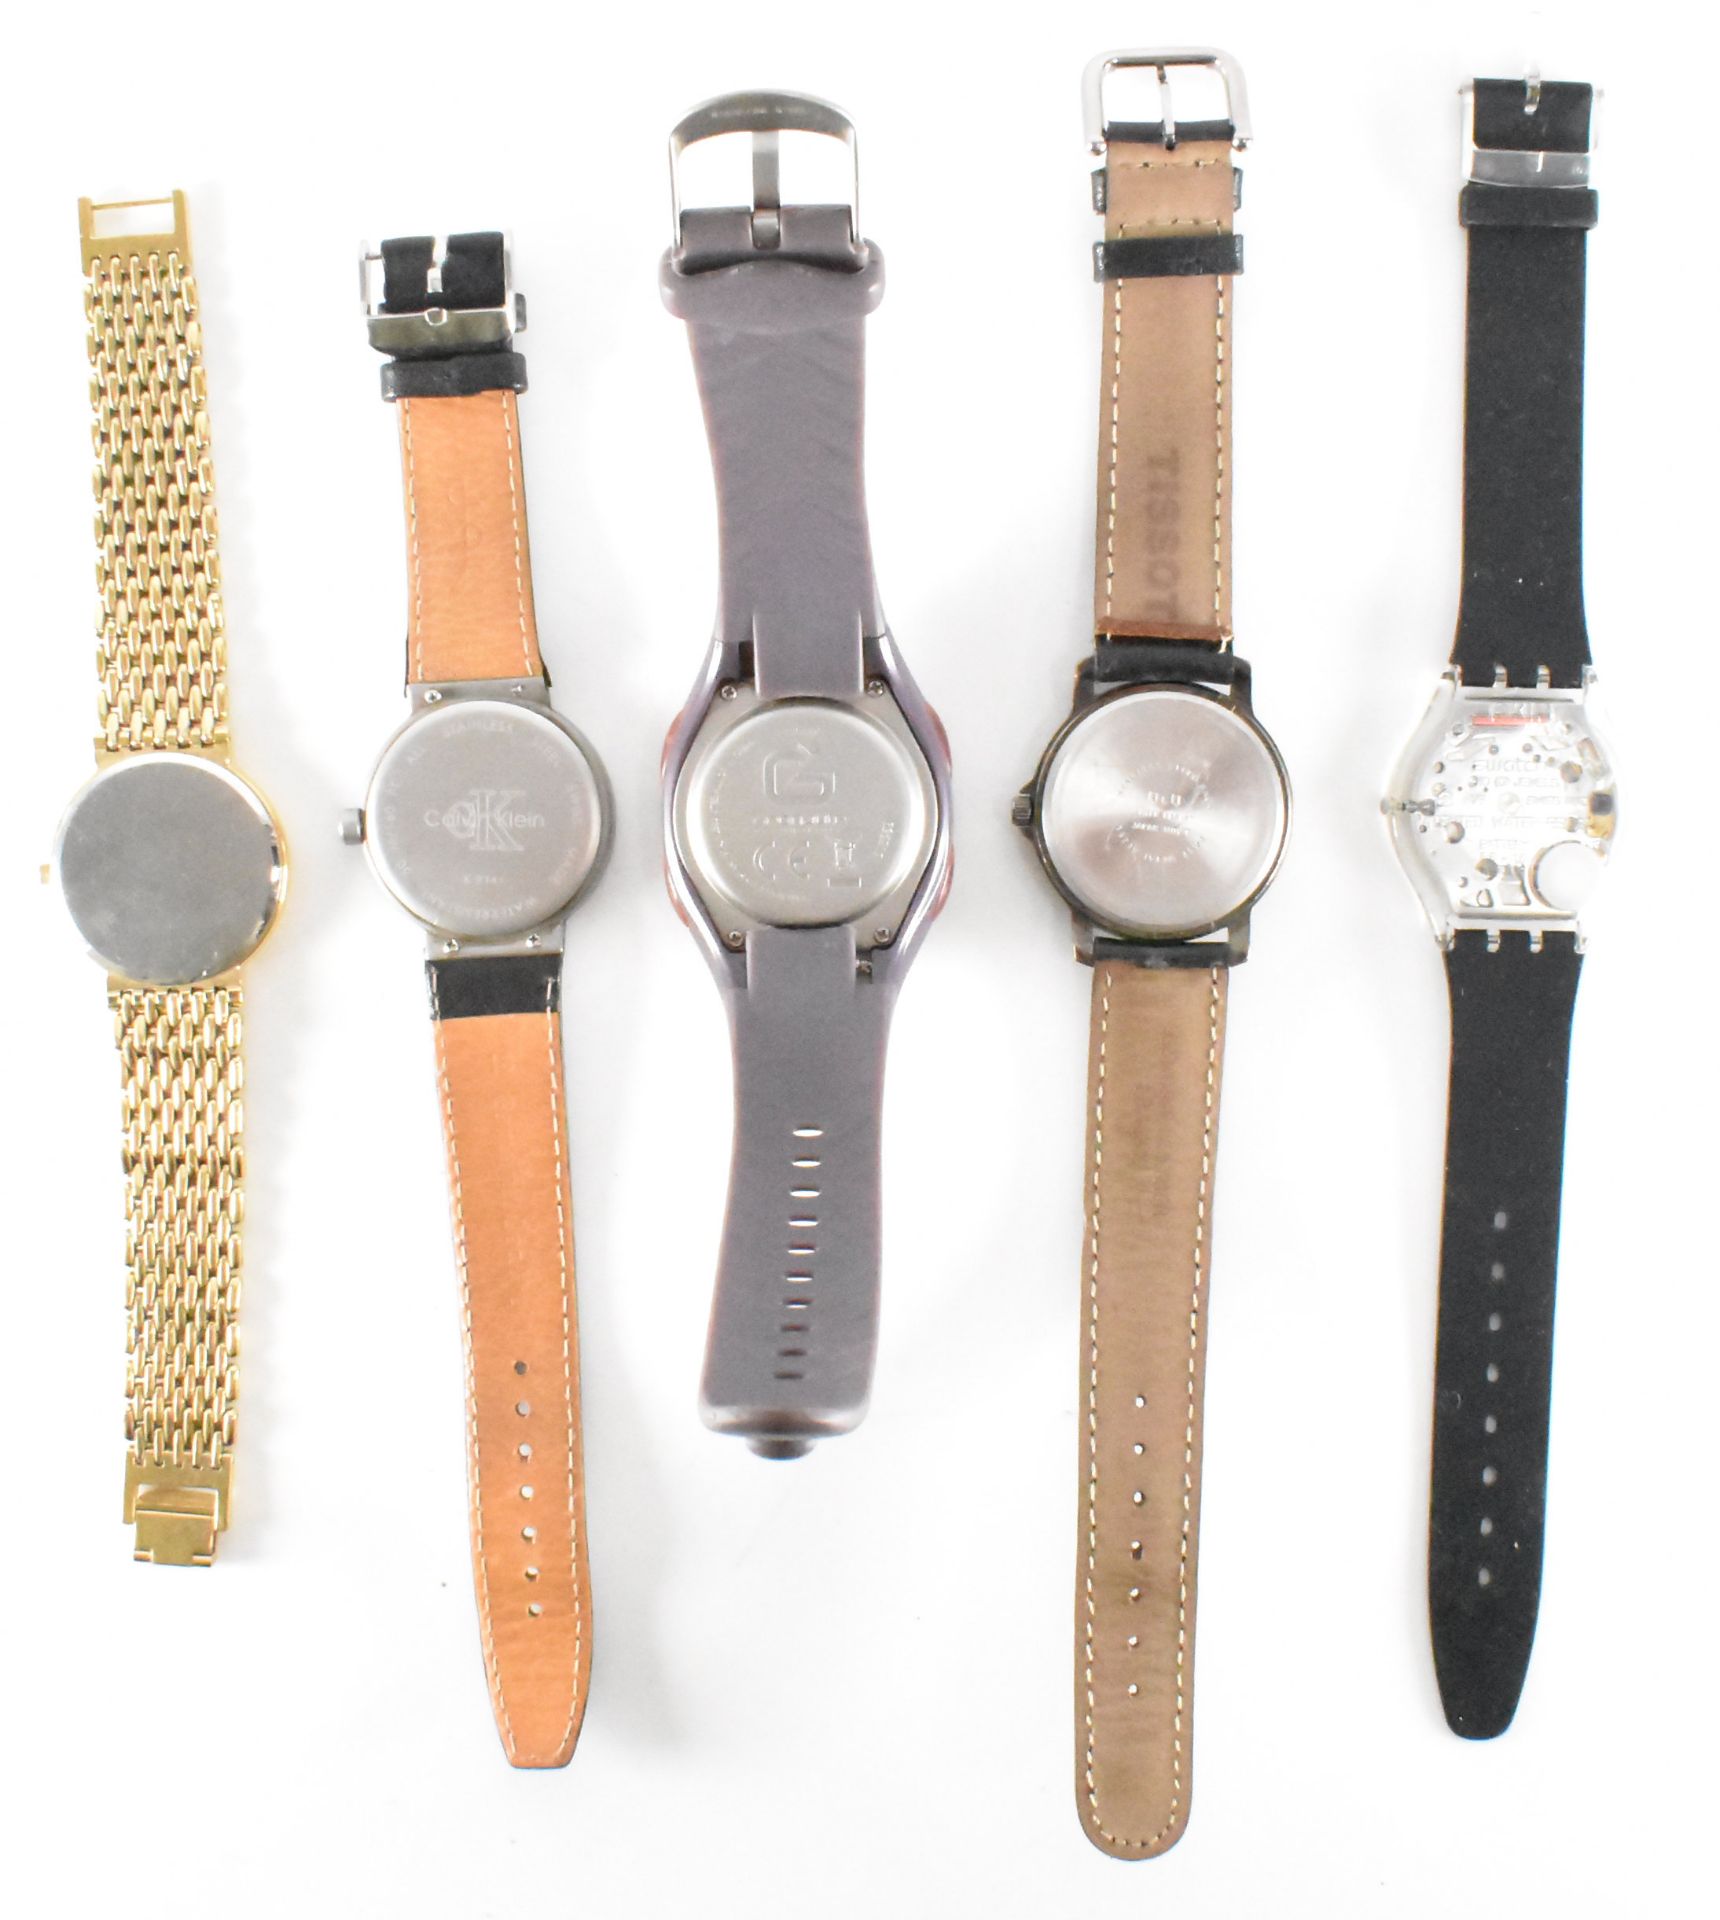 ASSORTMENT OF VARIOUS WRIST WATCHES - Image 5 of 7